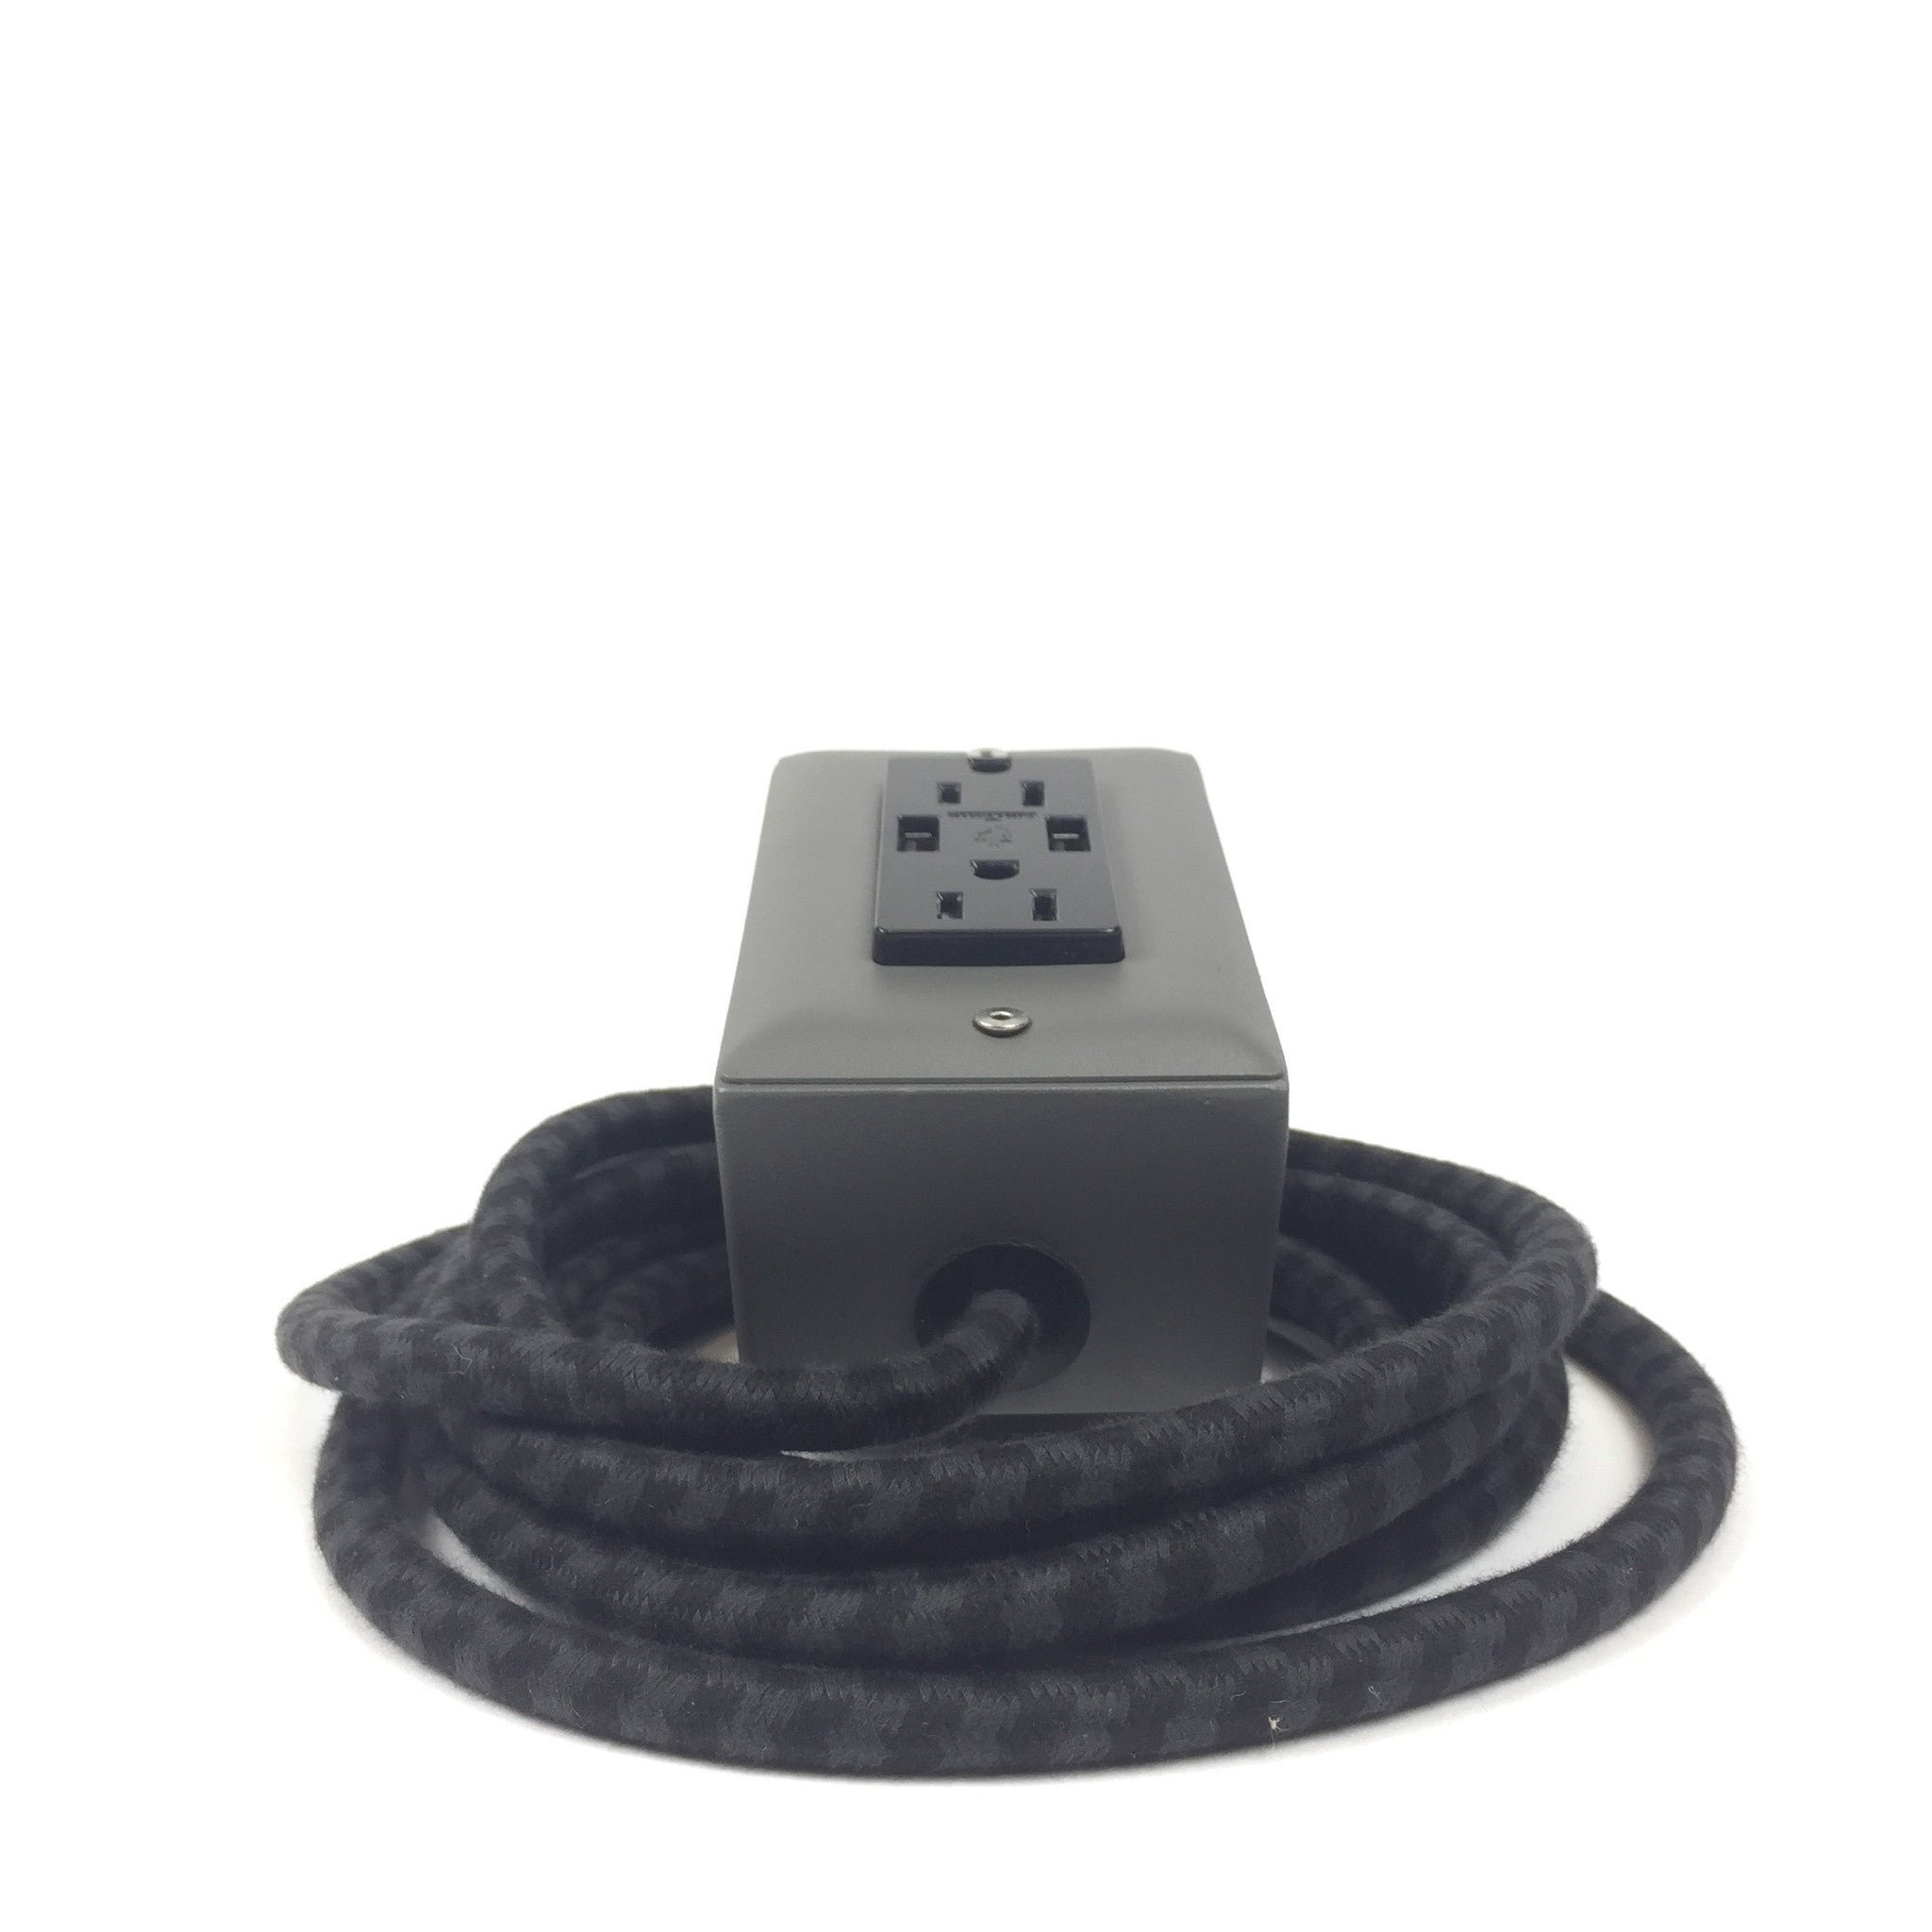 The First Smart Chip Extension Cord - 12' Extō Dual-USB, Dual-Outlet - Humboldt Fog Grey